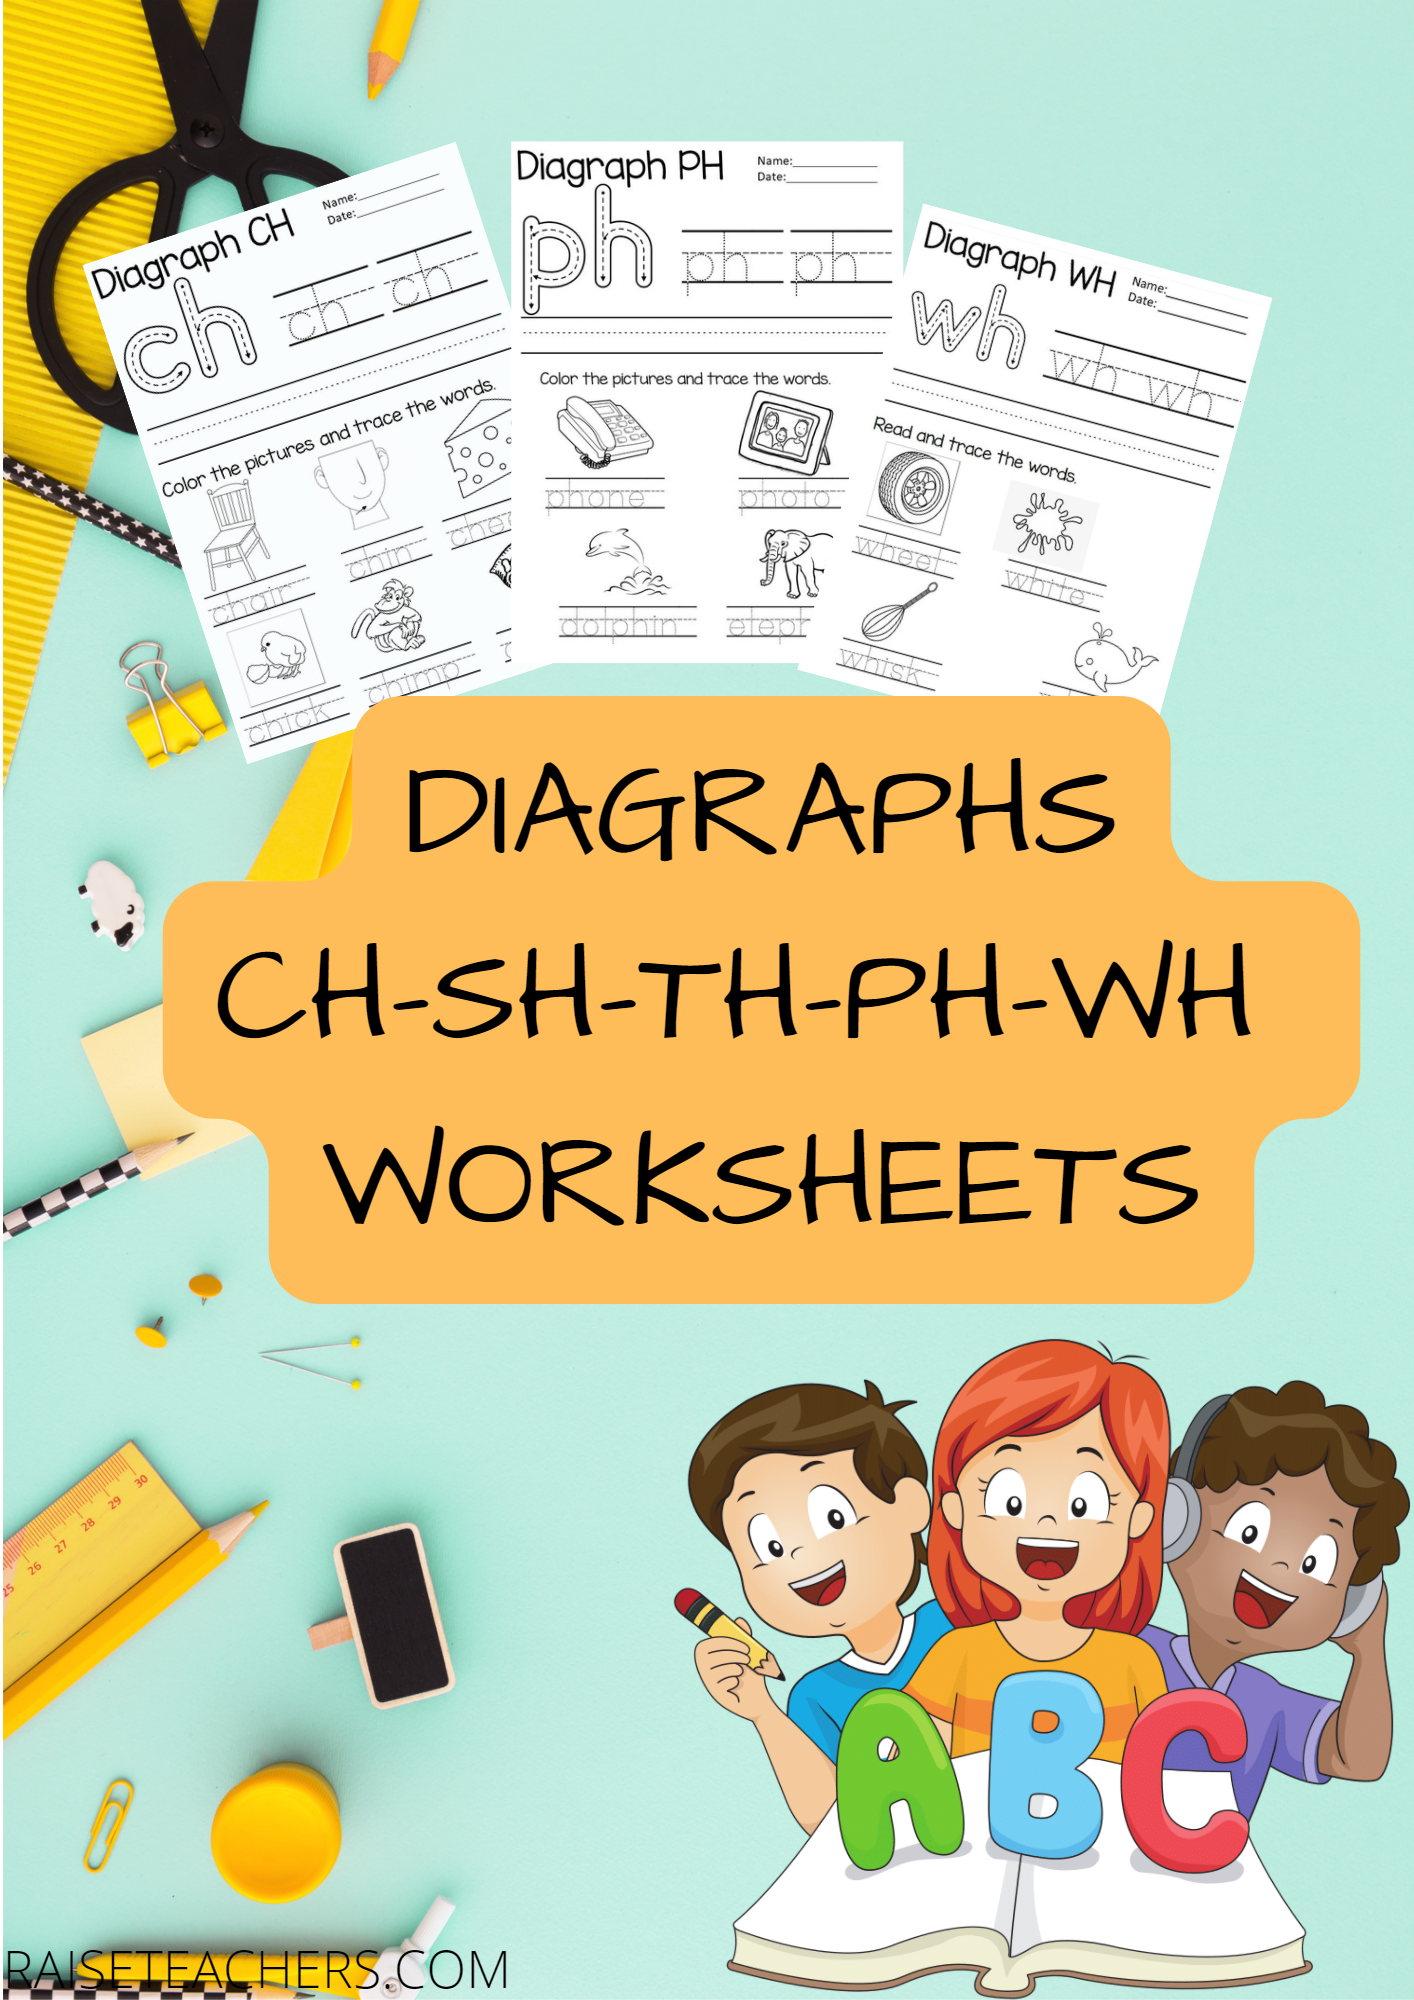 Educational phonics digraph worksheets for children.